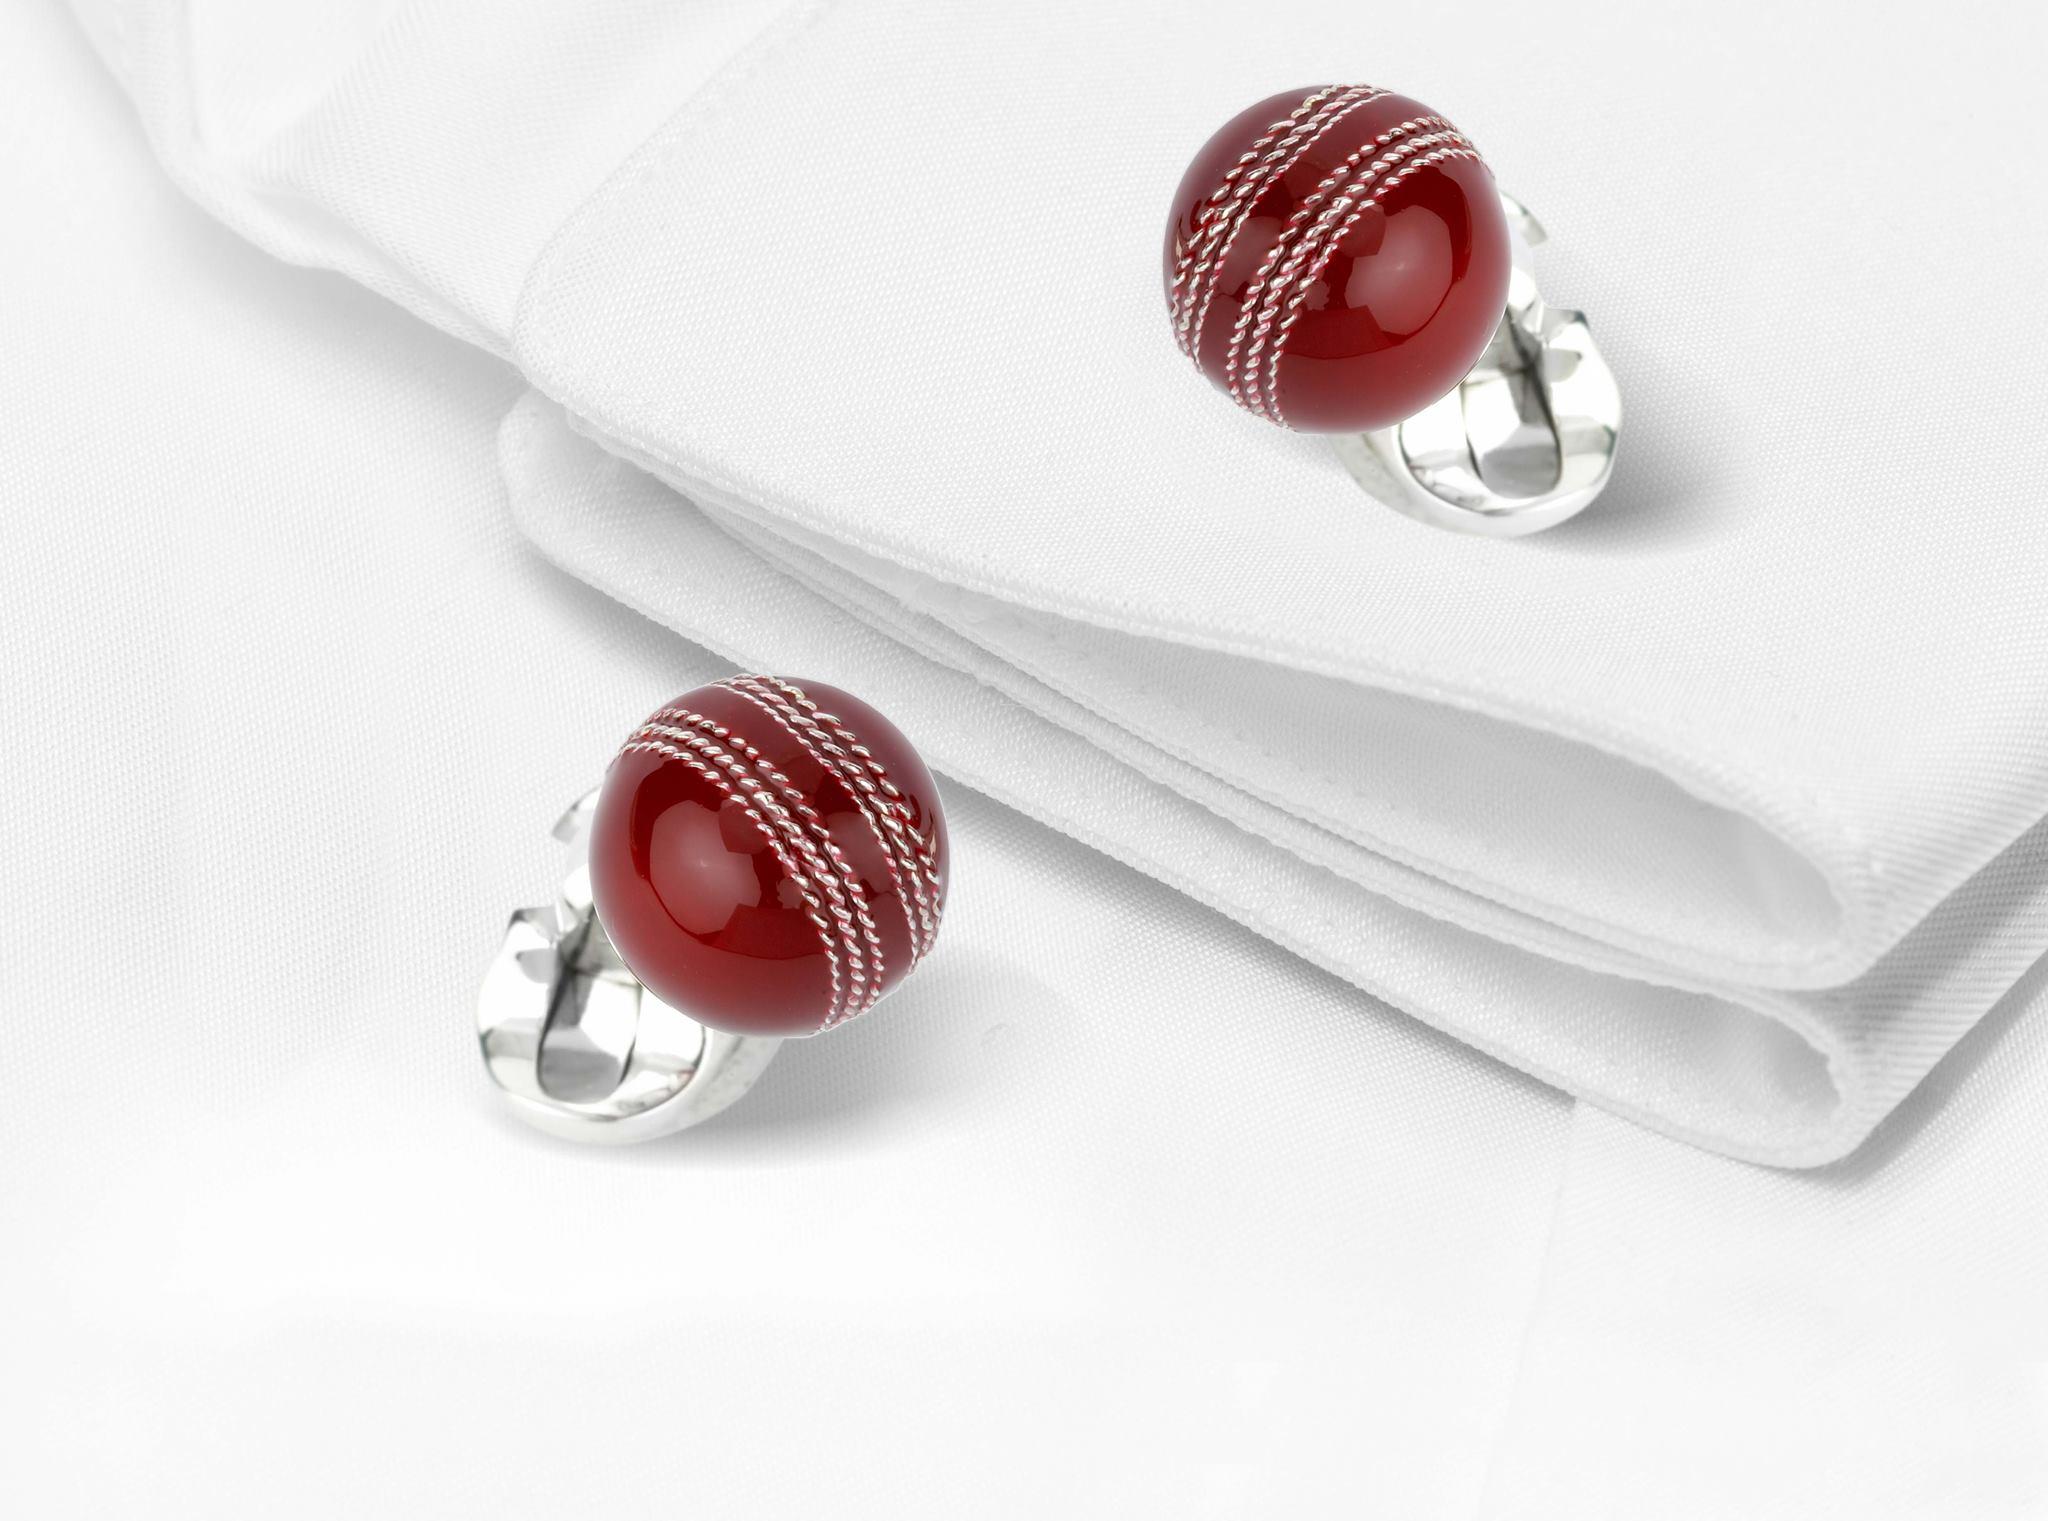 DEAKIN & FRANCIS, Piccadilly Arcade, London

A real gentleman’s game, cricket is a staple of English sporting culture. Evoking thoughts of summer afternoons spent on the green as a child the Deakin & Francis cricket ball cufflinks are a sartorial